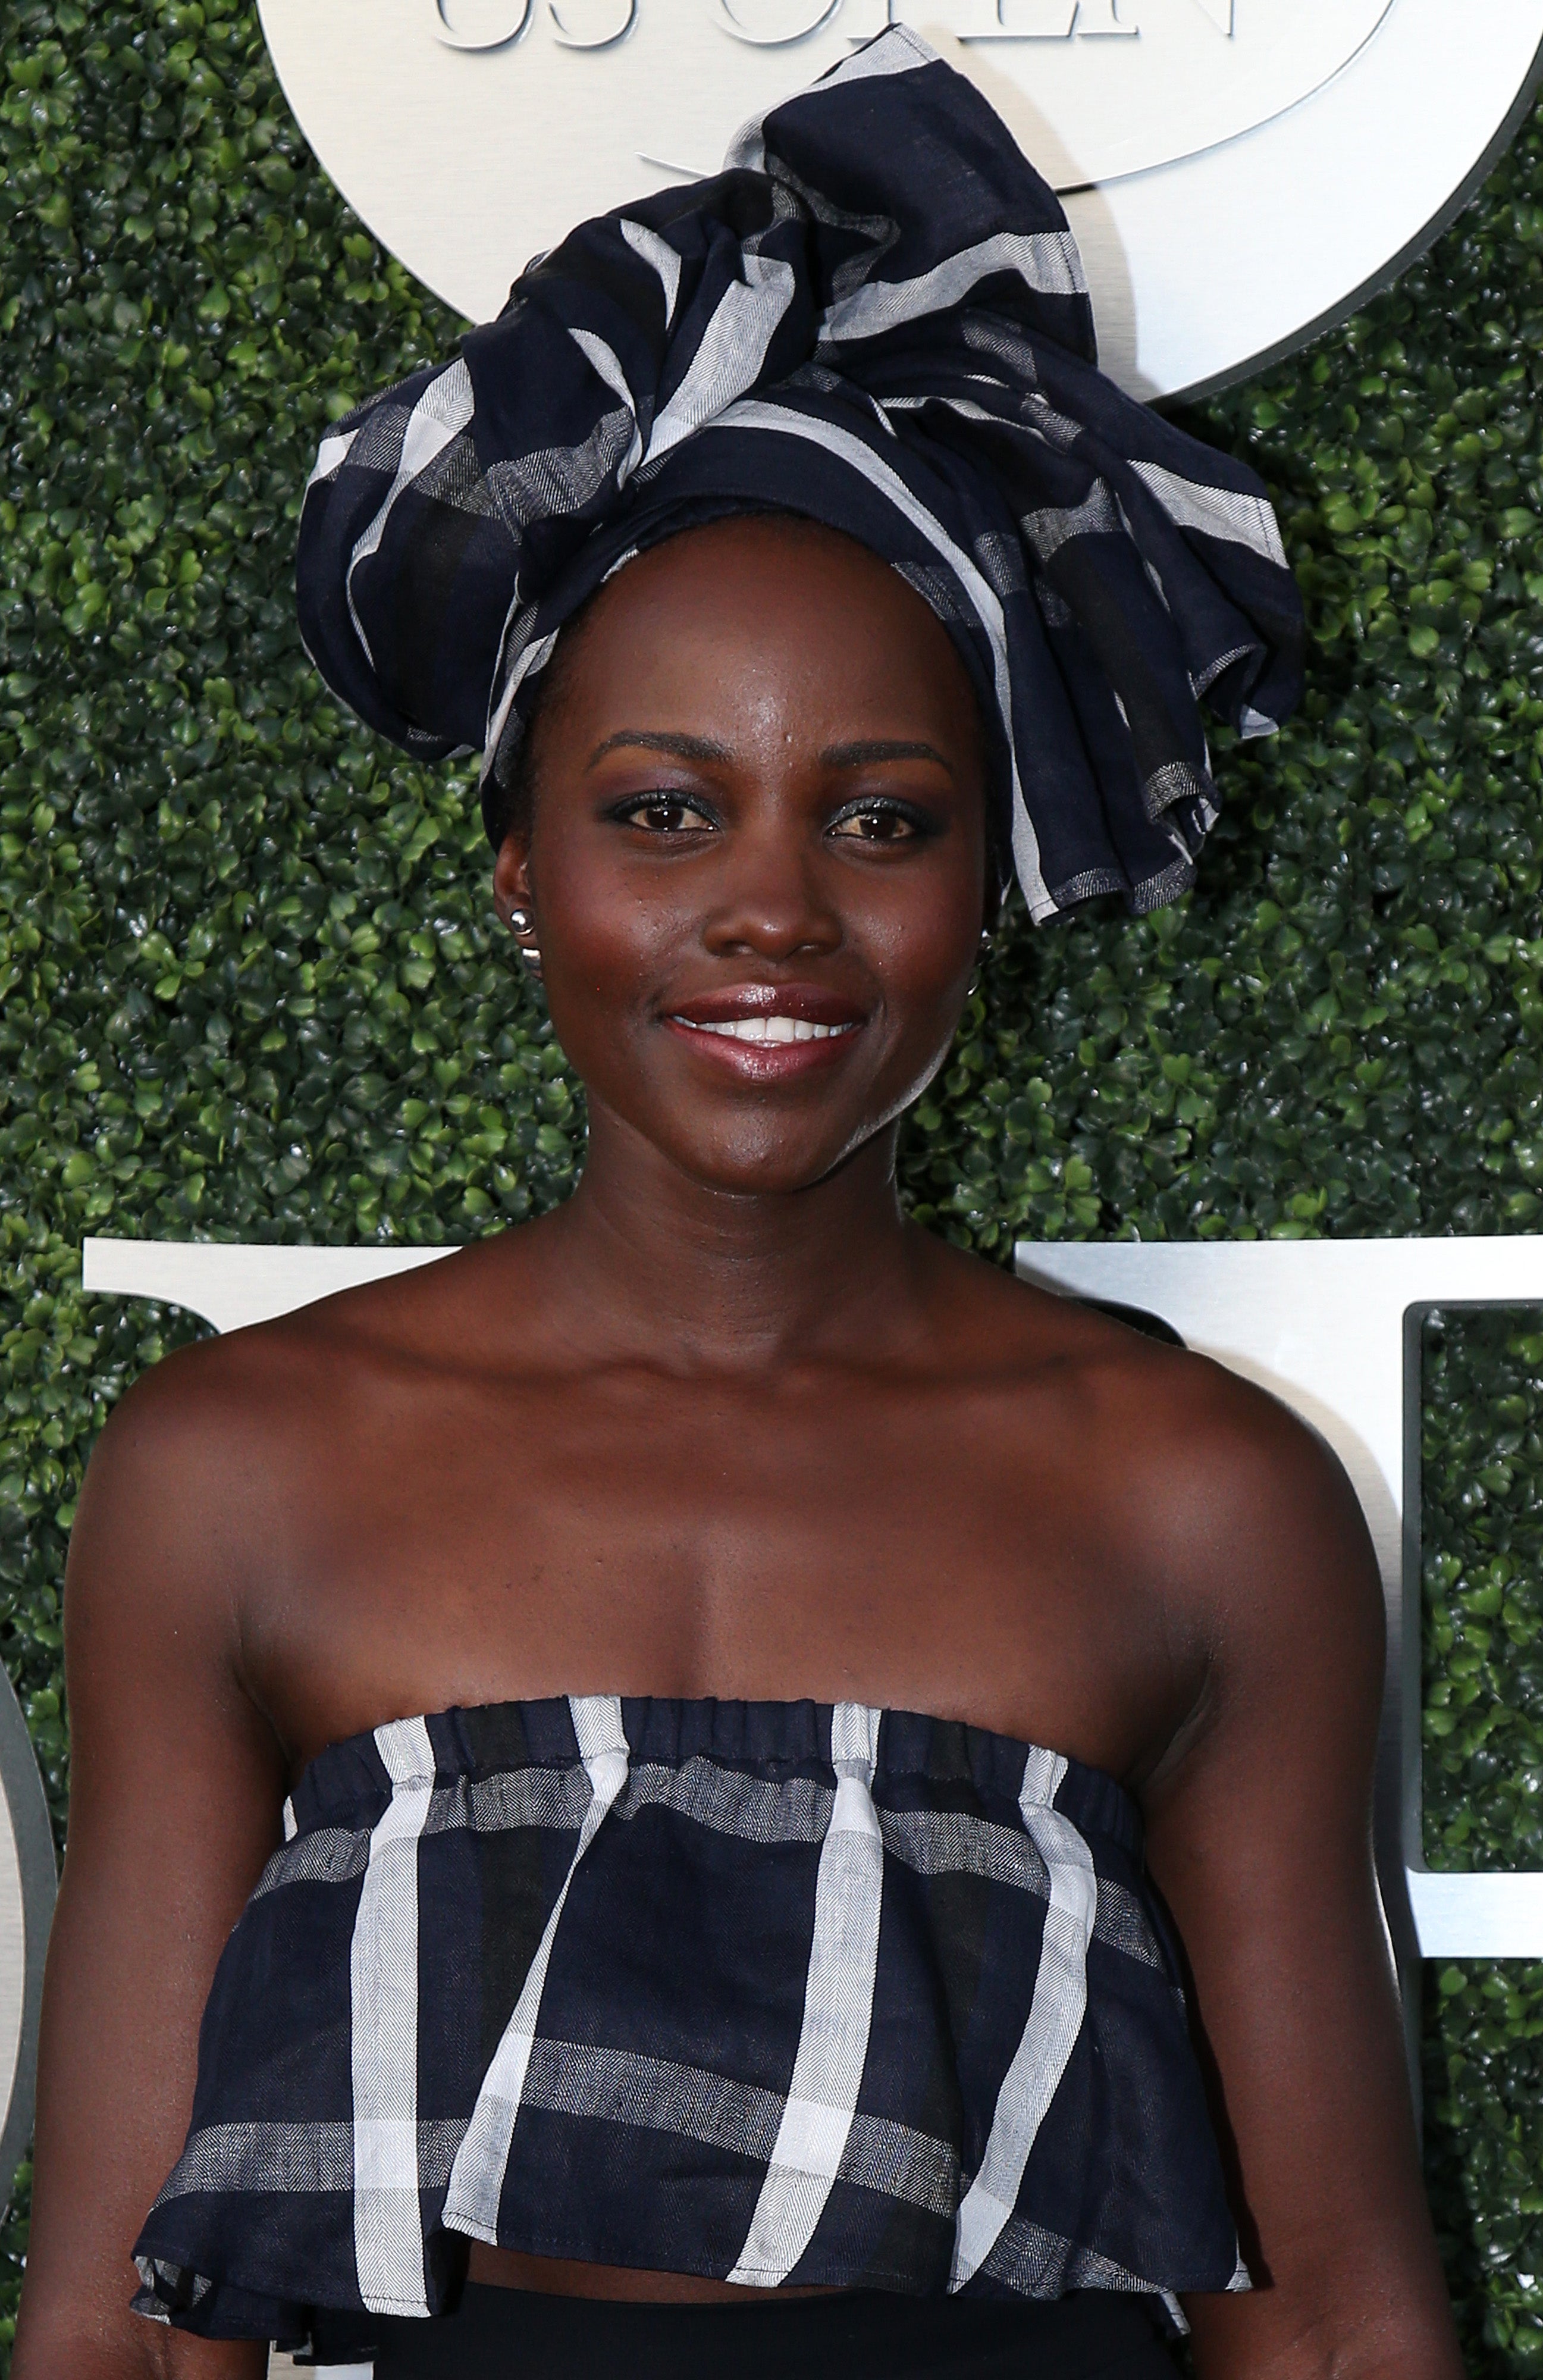 Lupita Nyong'o Slays in Adorable Printed Top and Headwrap
